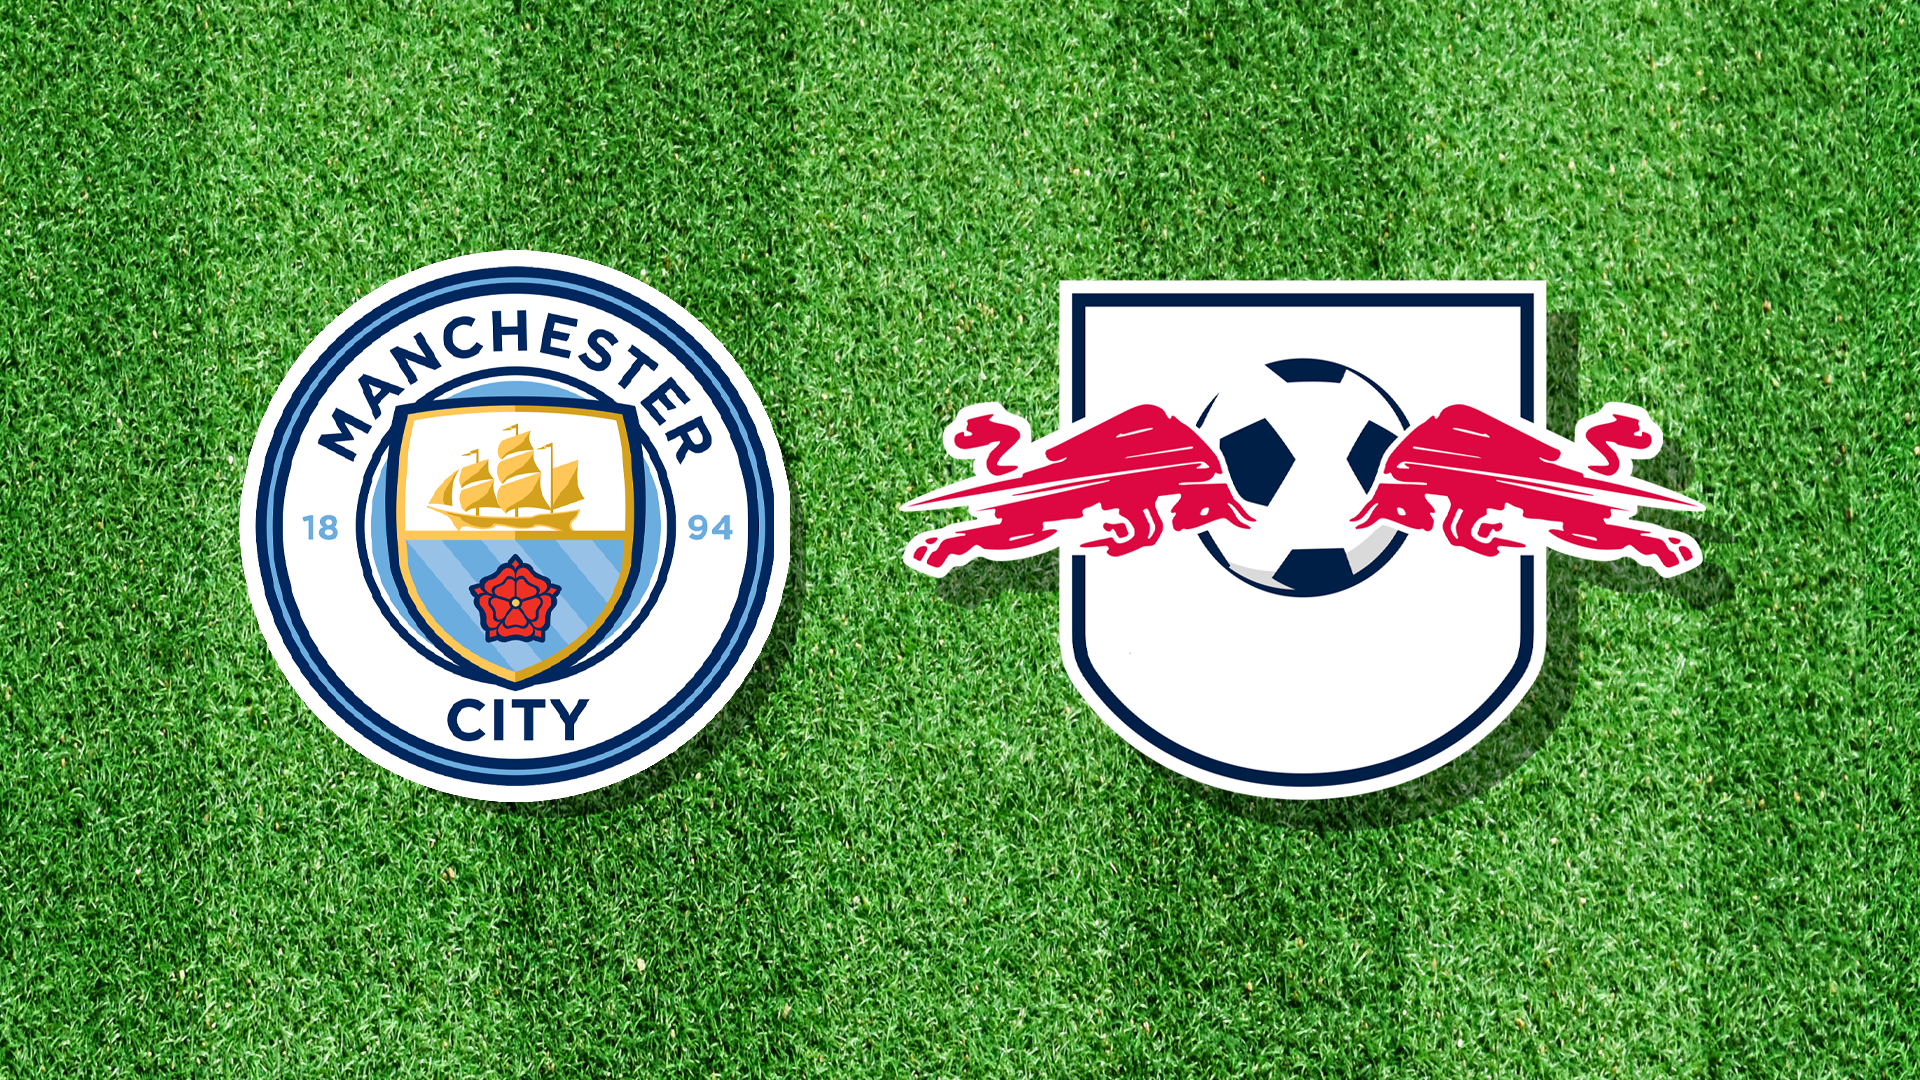 Manchester City and their opponents' badge, which has been altered for this question